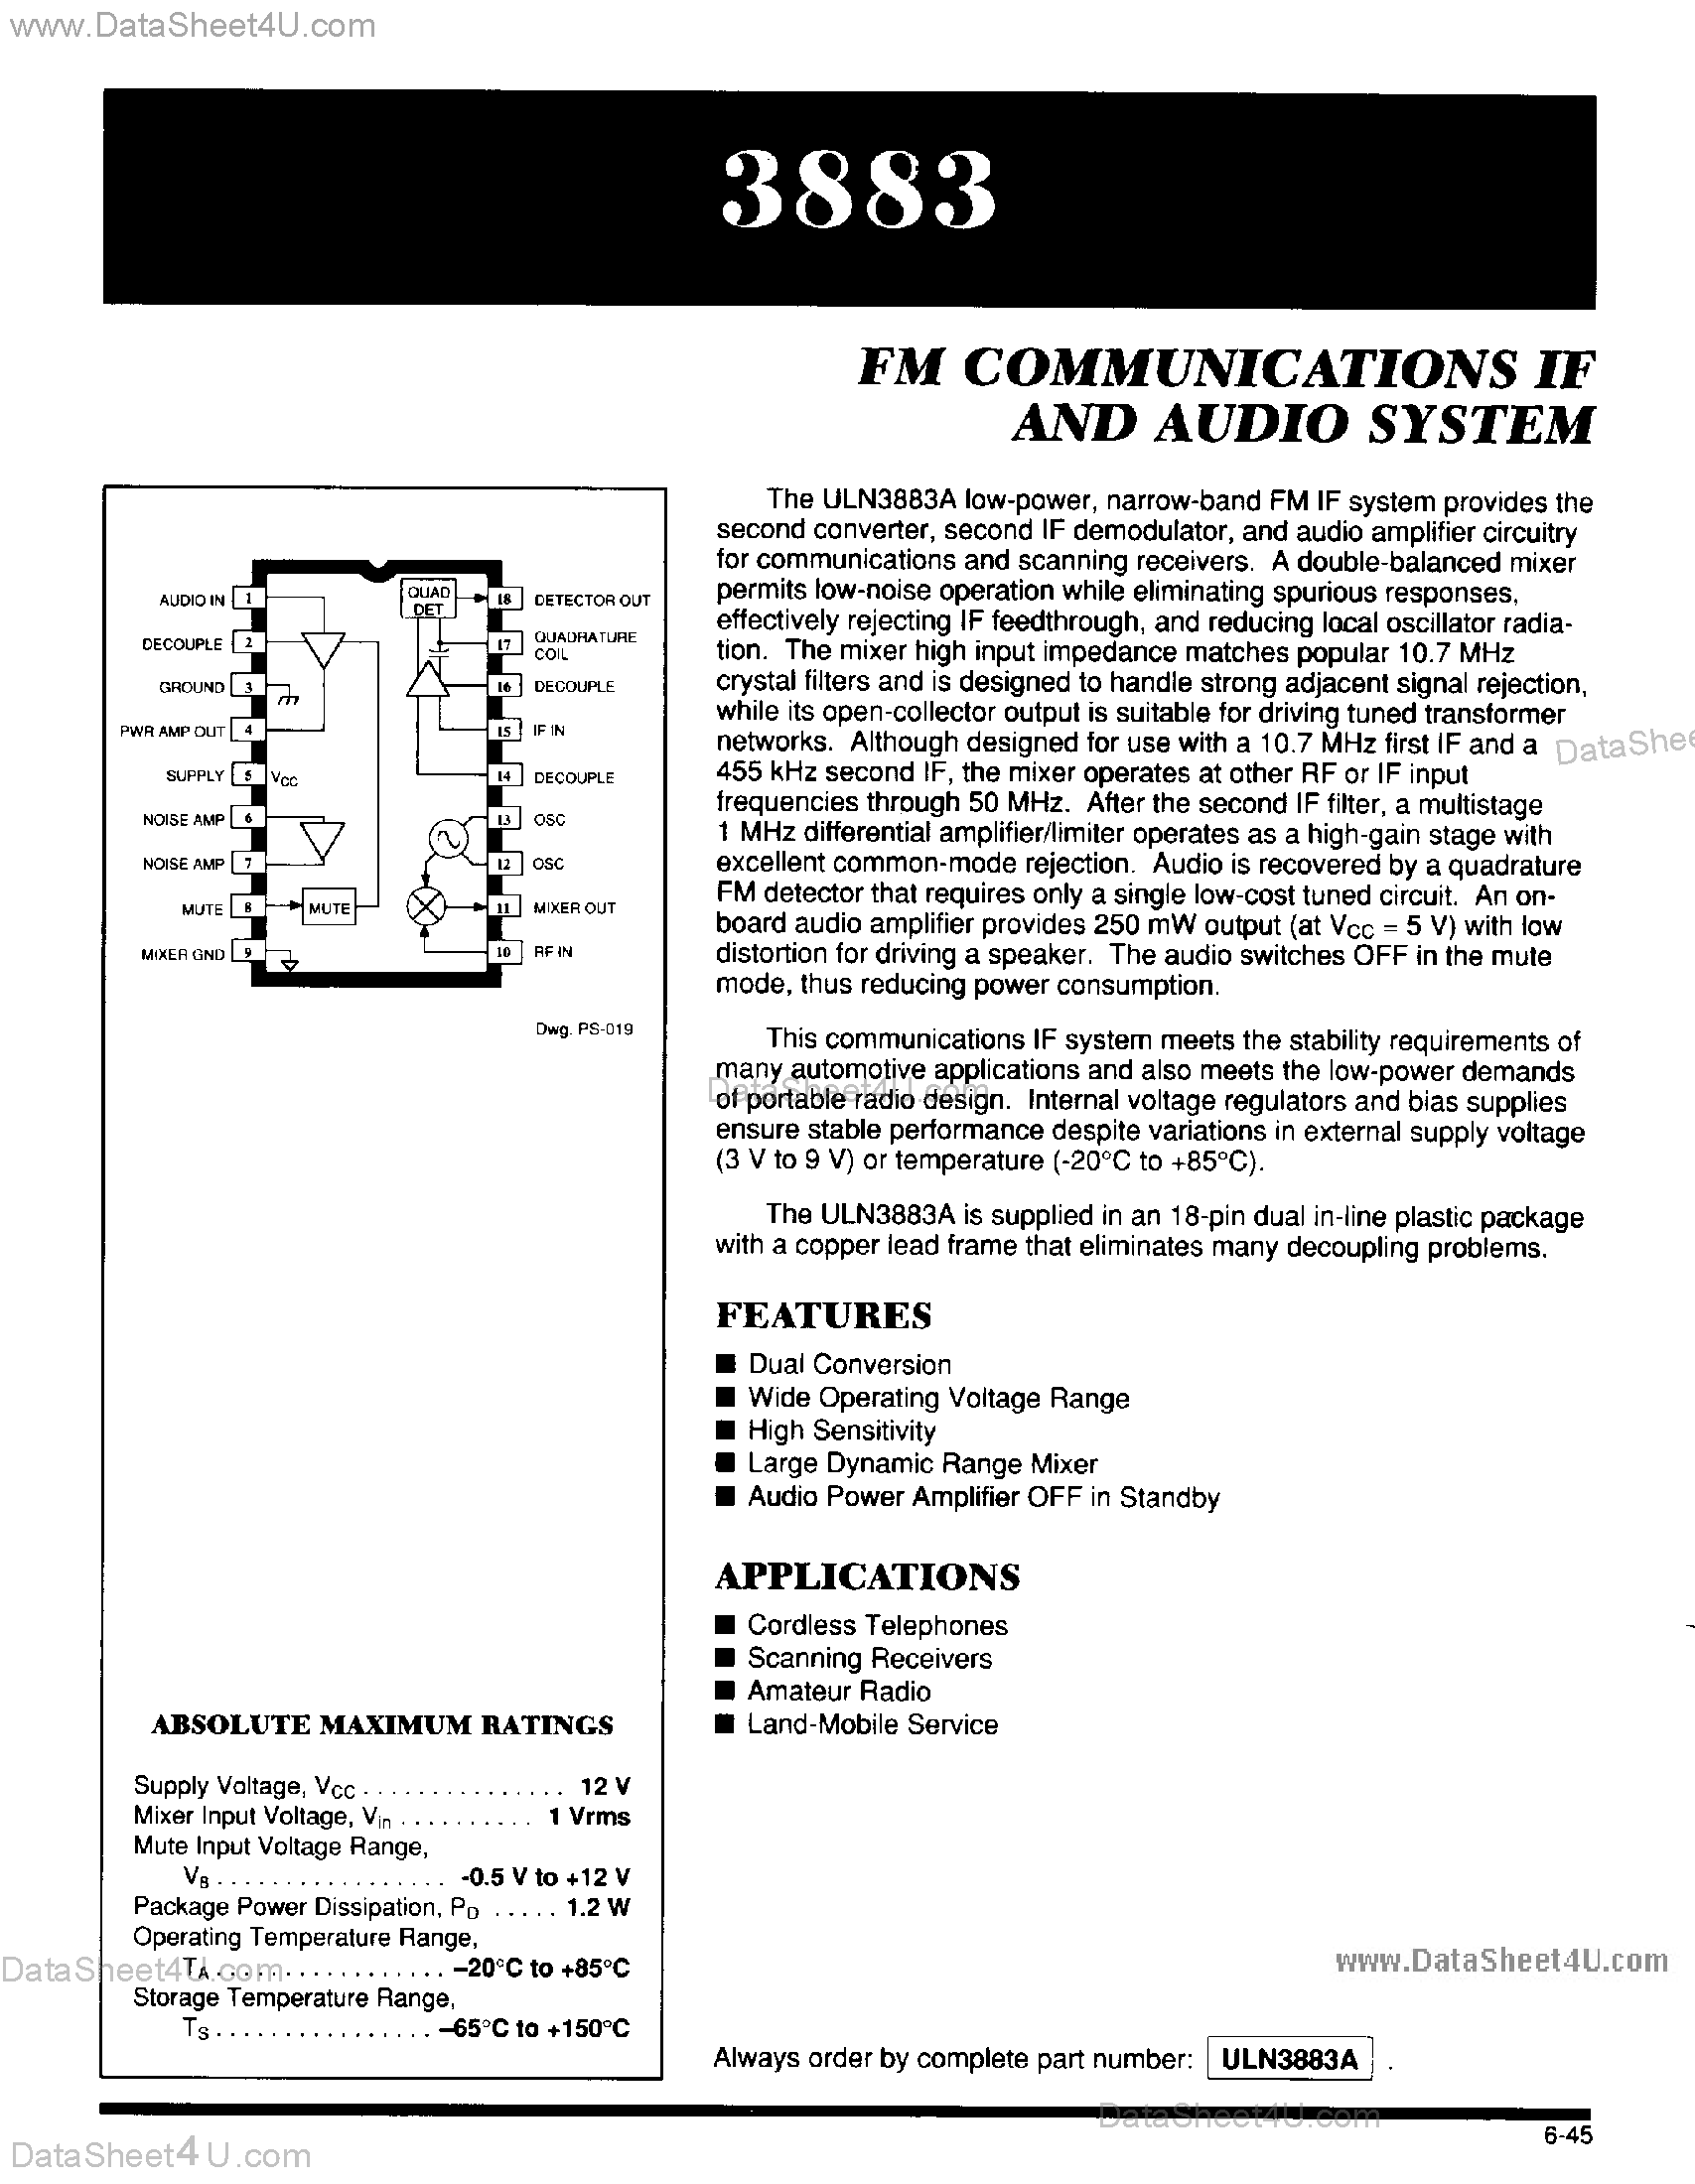 Datasheet ULN3883 - FM Communications IF and Audio System page 1